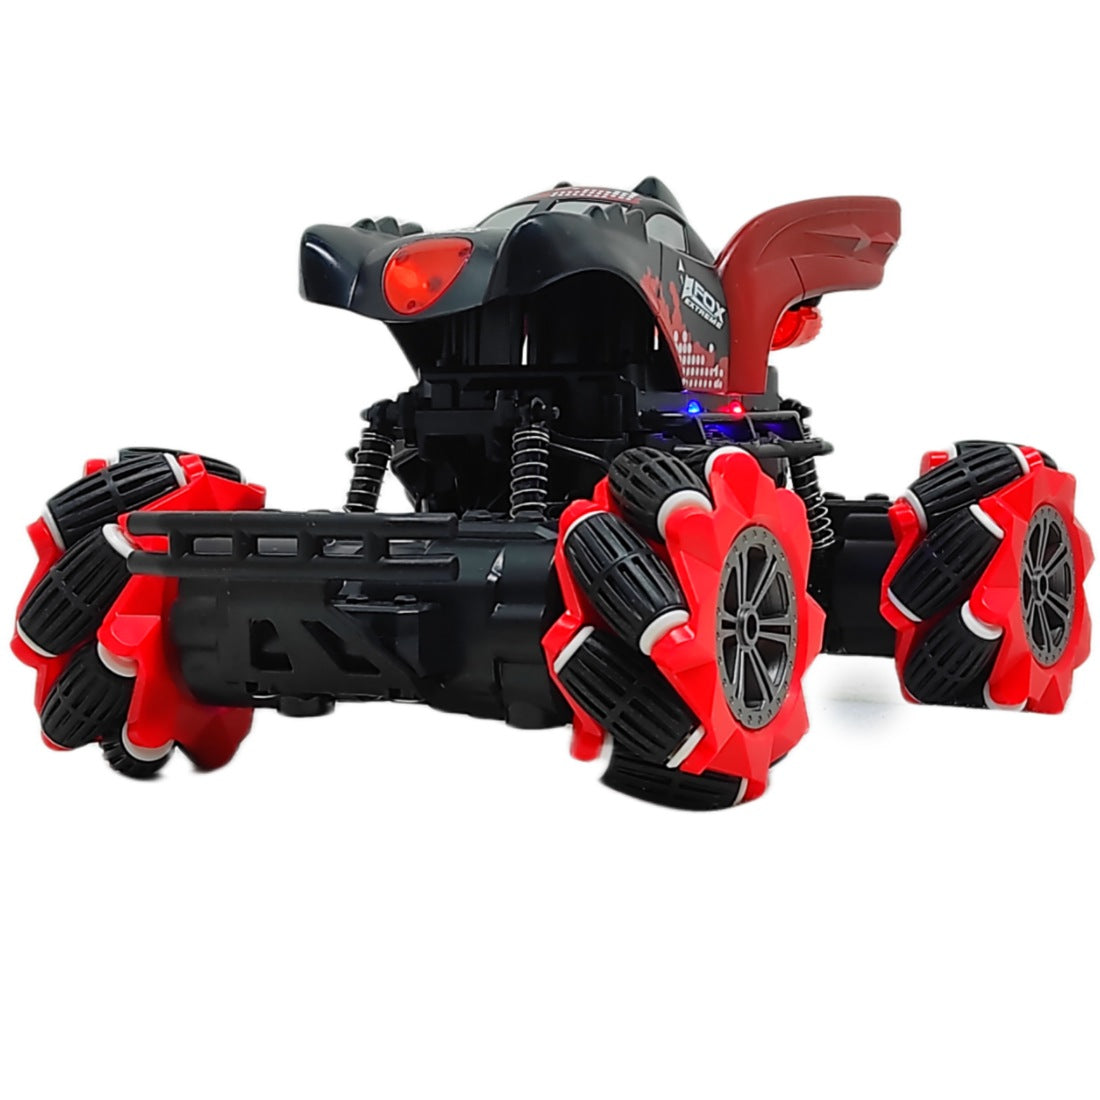  Zerodis Speedy RC Car, 1:18 2WD Multifunction Offroad Remote  Control Flexible Quad Climbing Toy for Kids (Red) : Toys & Games